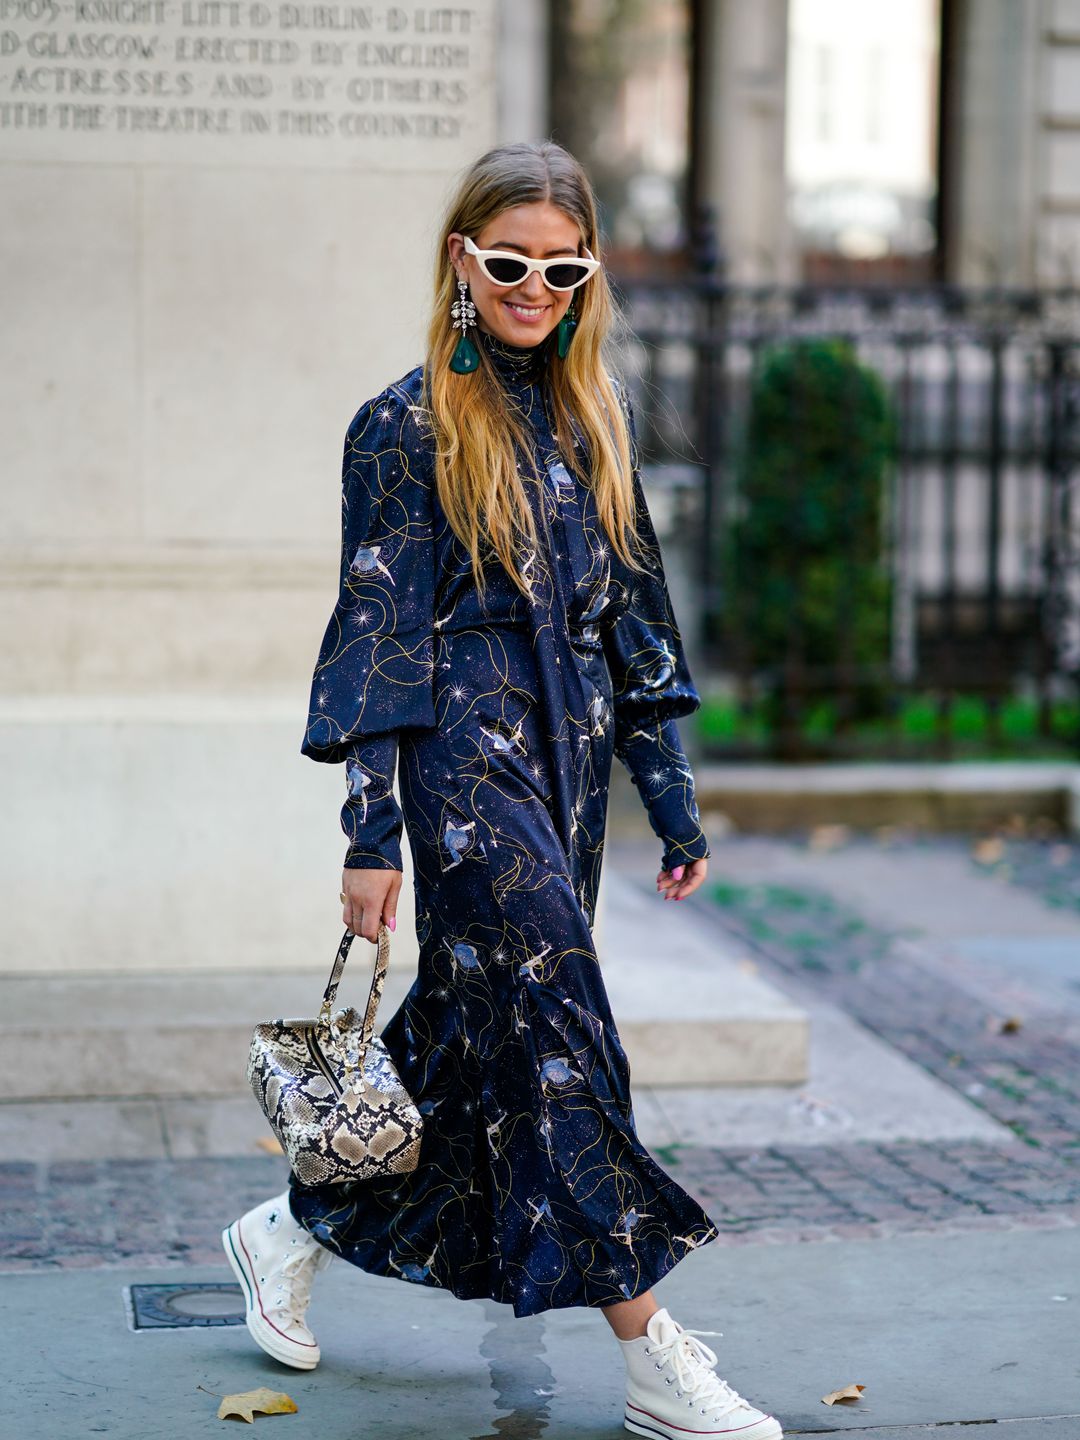 Emili Sindlev rocks a navy patterned midi with high tops 